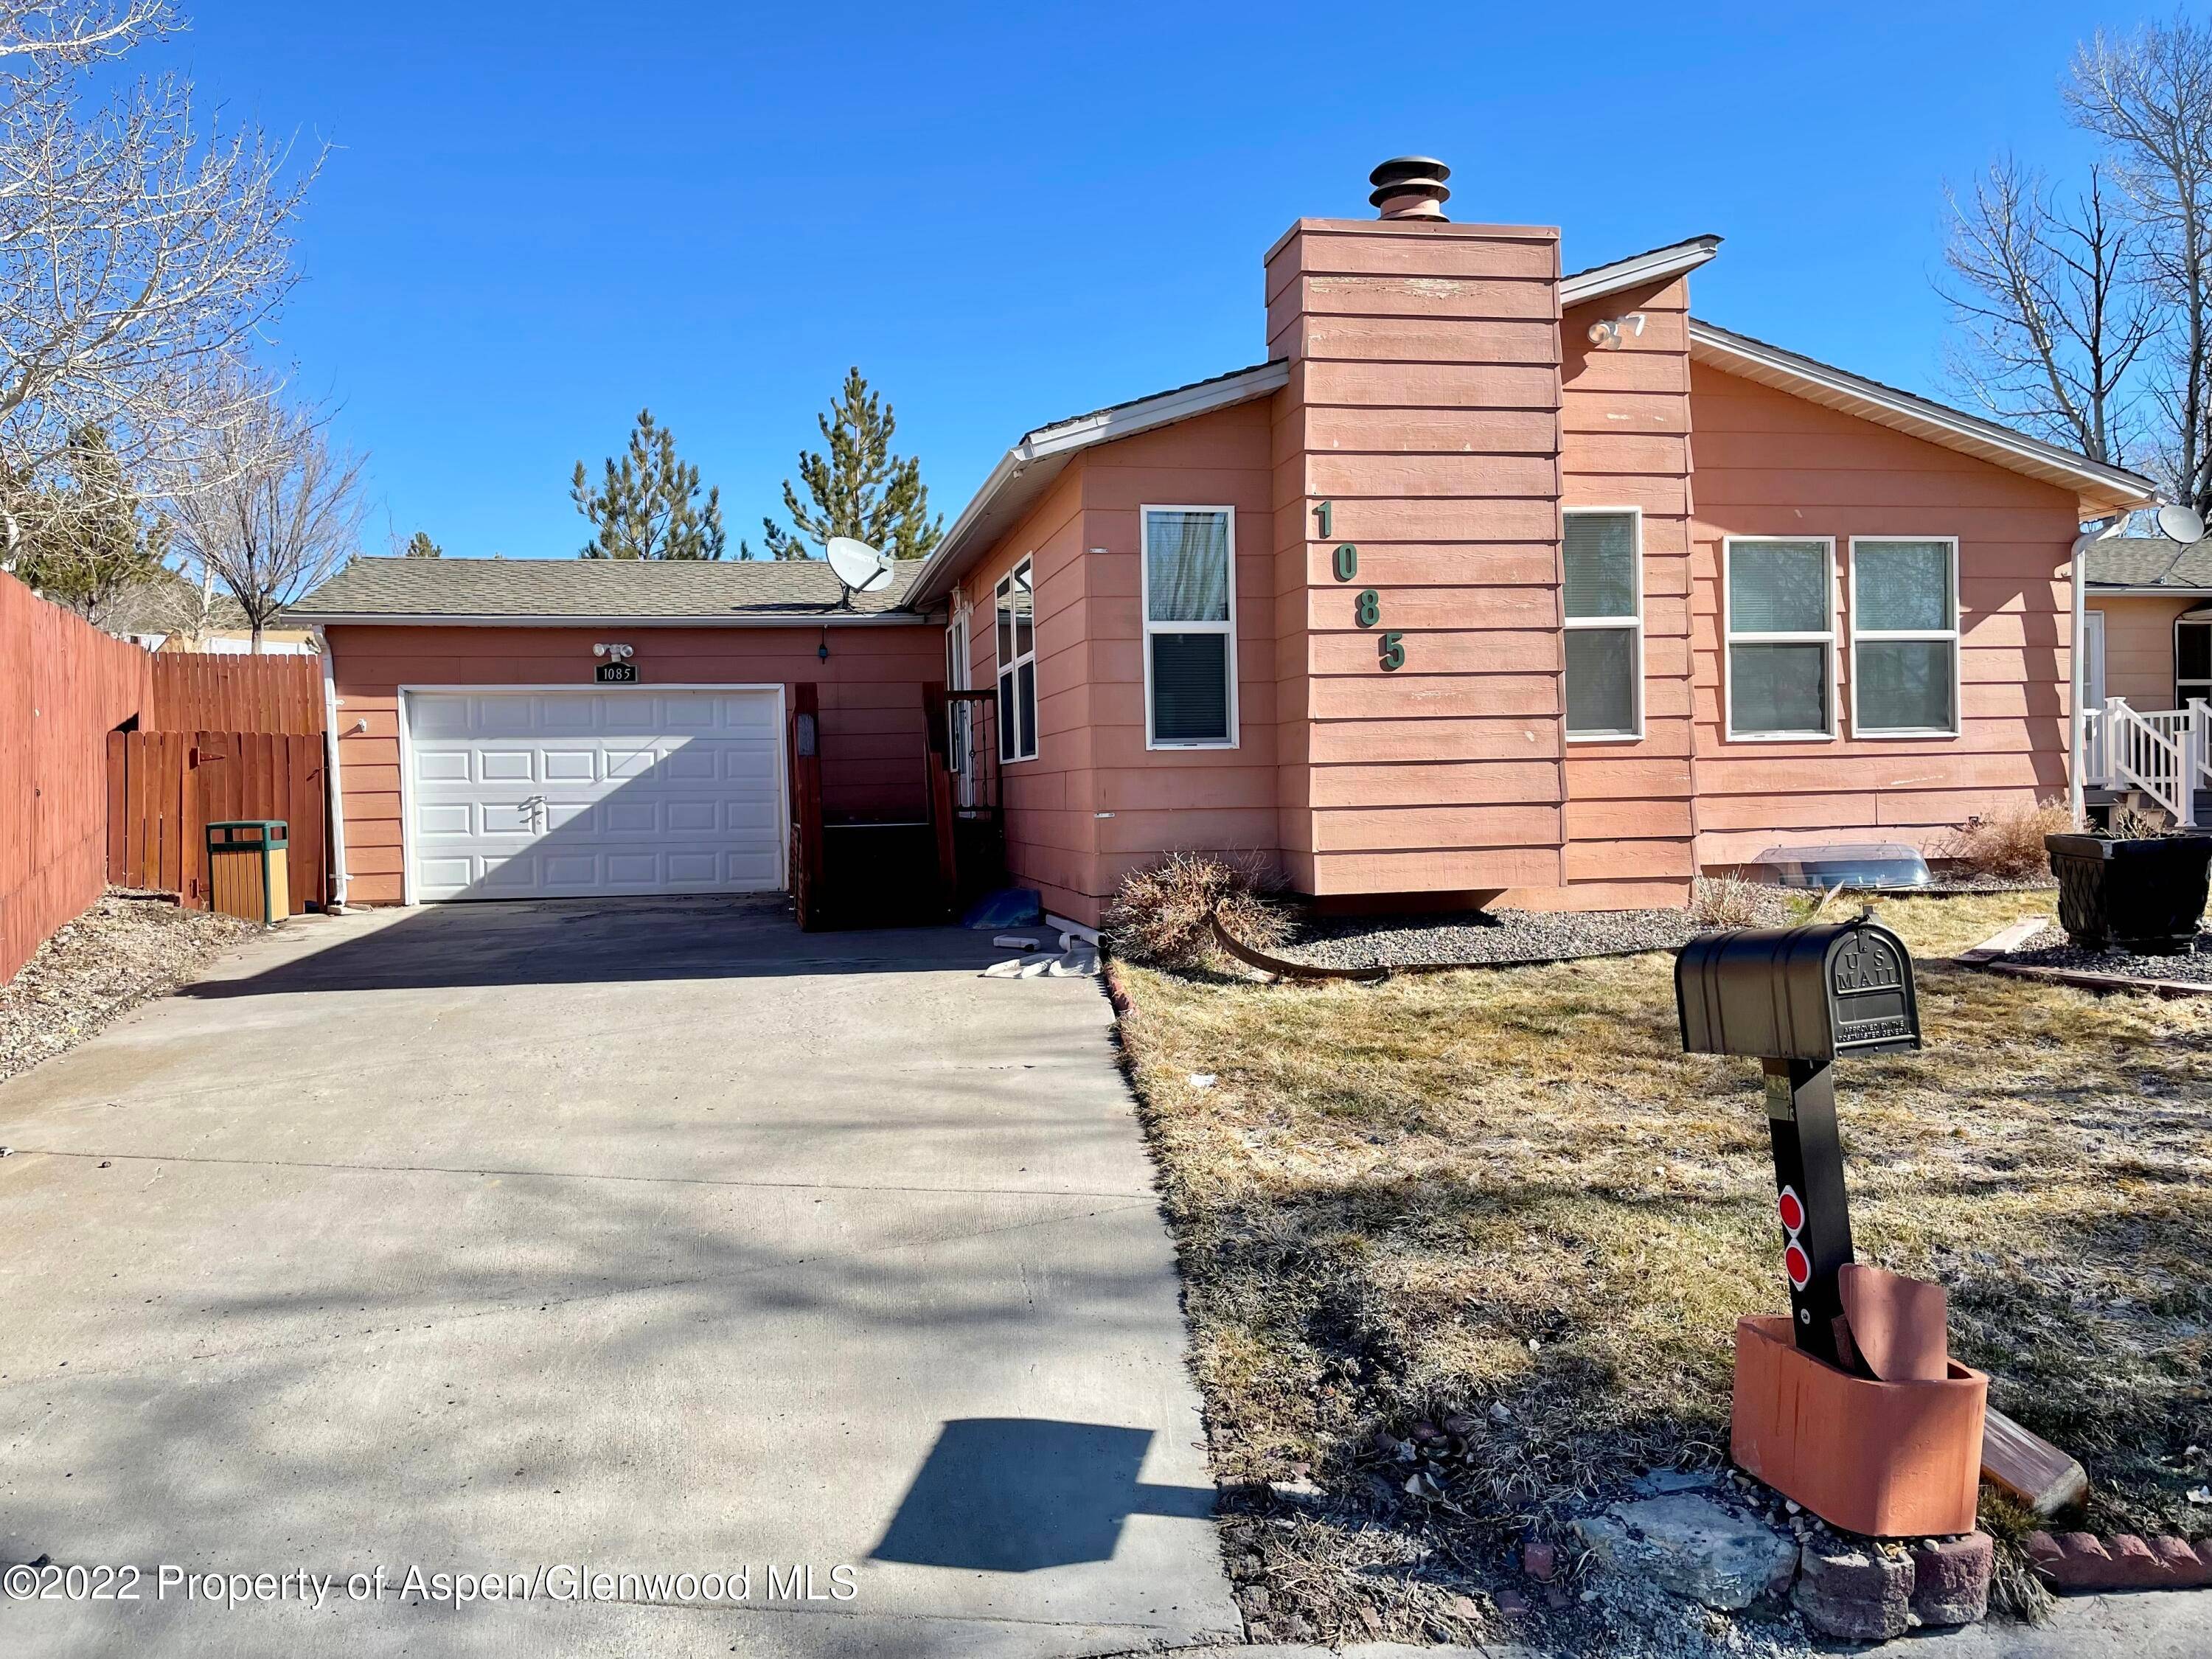 This ranch style home includes a full basement, providing an abundant amount of space for a primary home or great investment property.